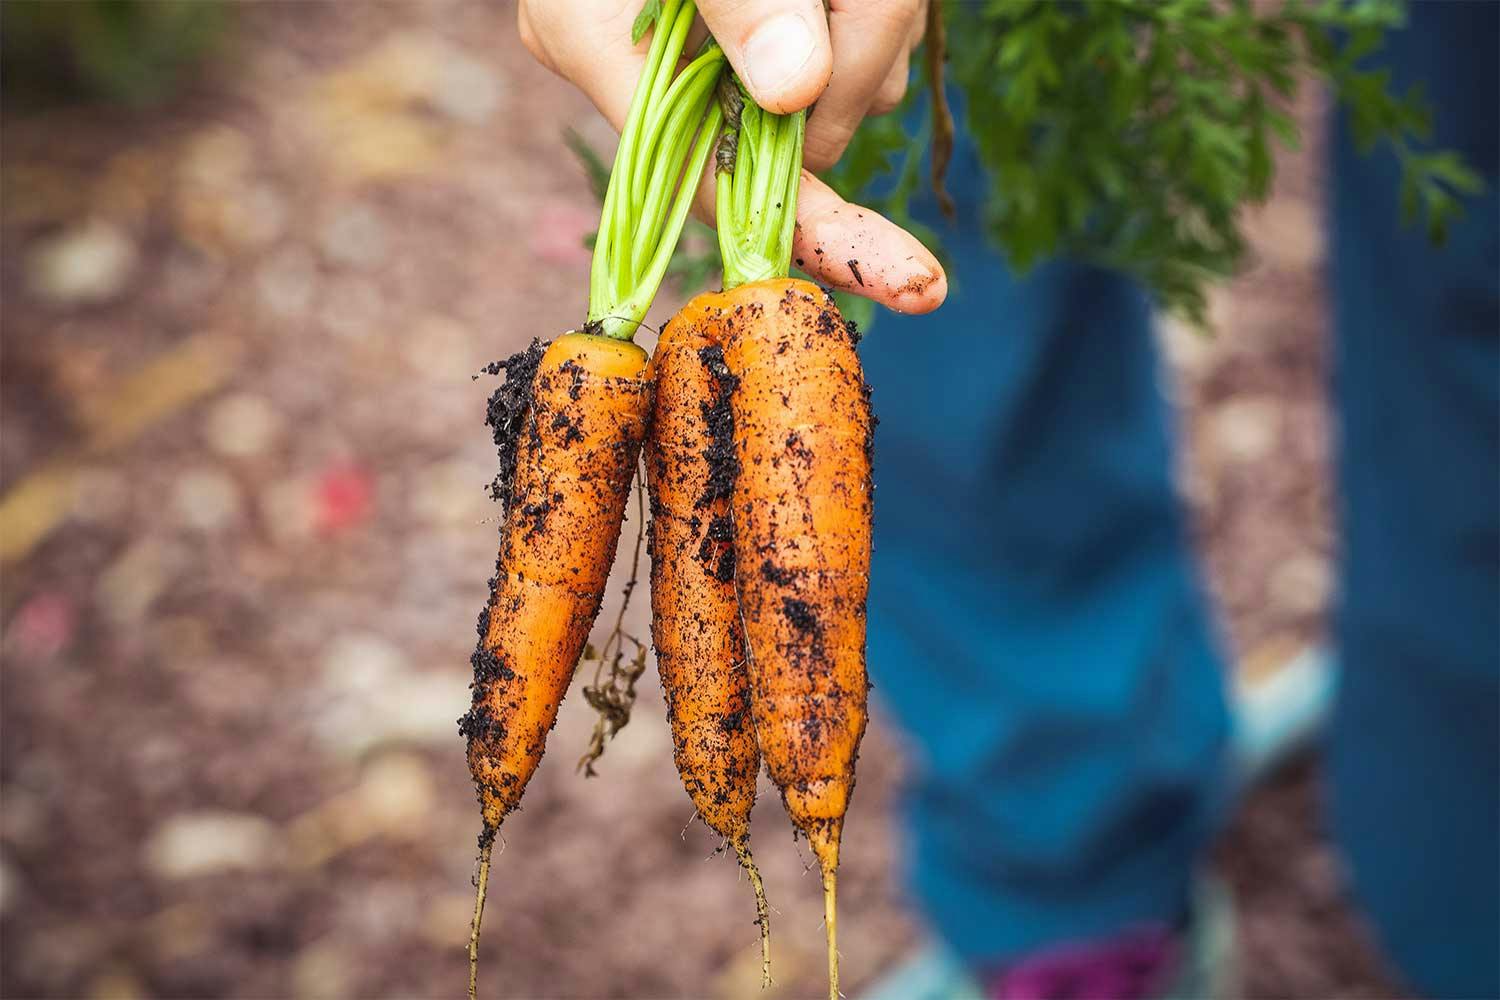 A hand holding three carrots, just plucked, covered in dirt.